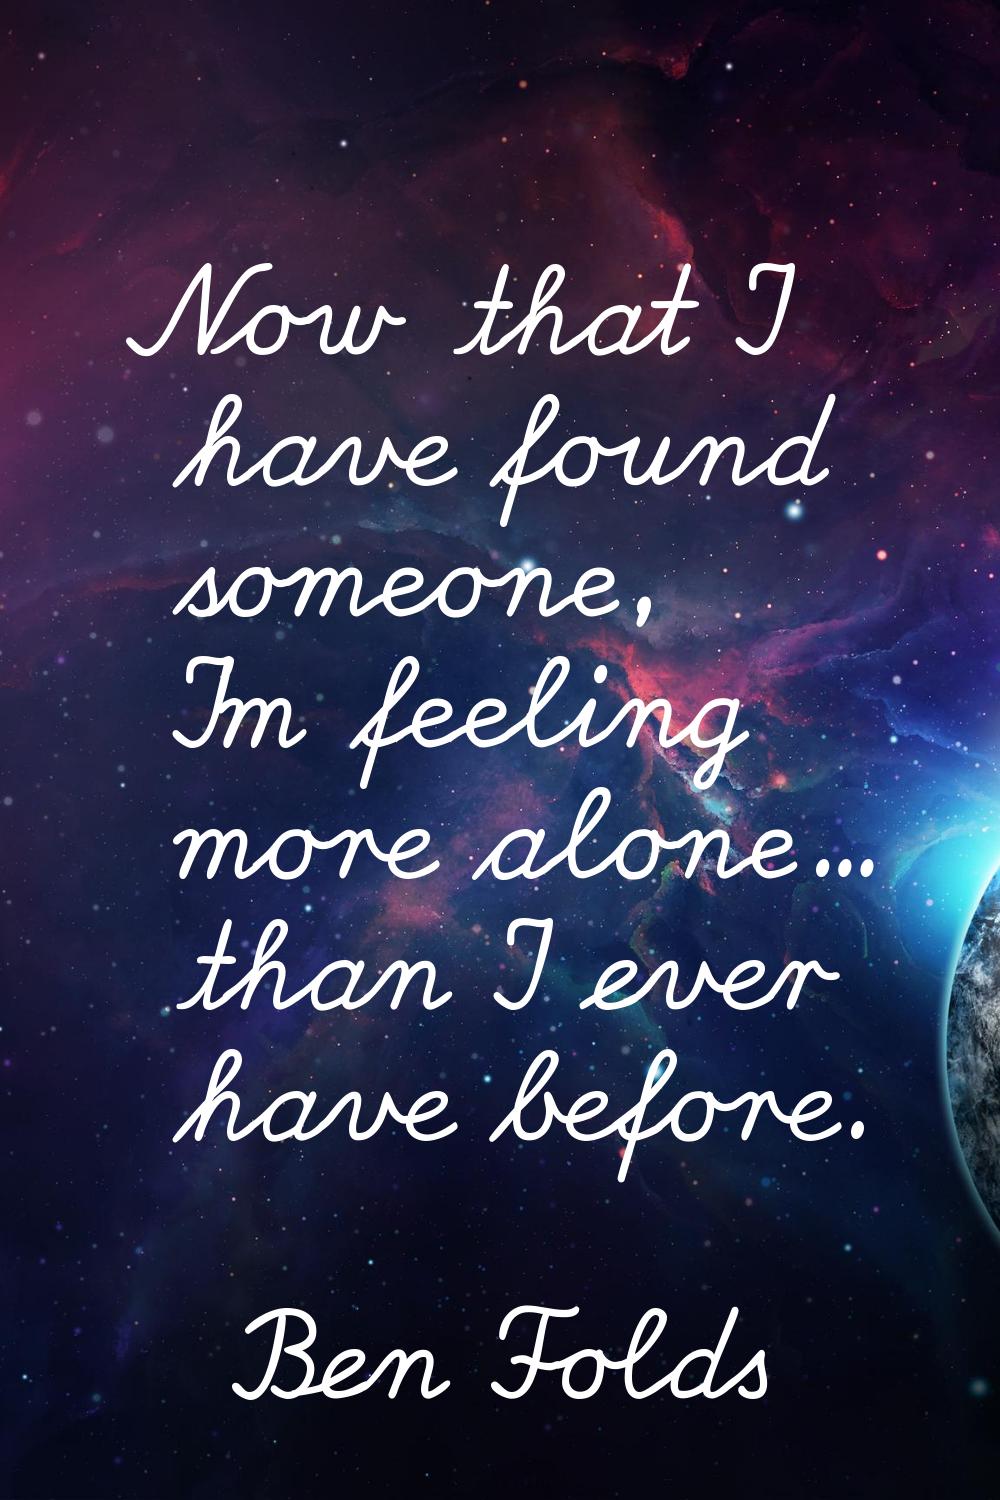 Now that I have found someone, I'm feeling more alone... than I ever have before.